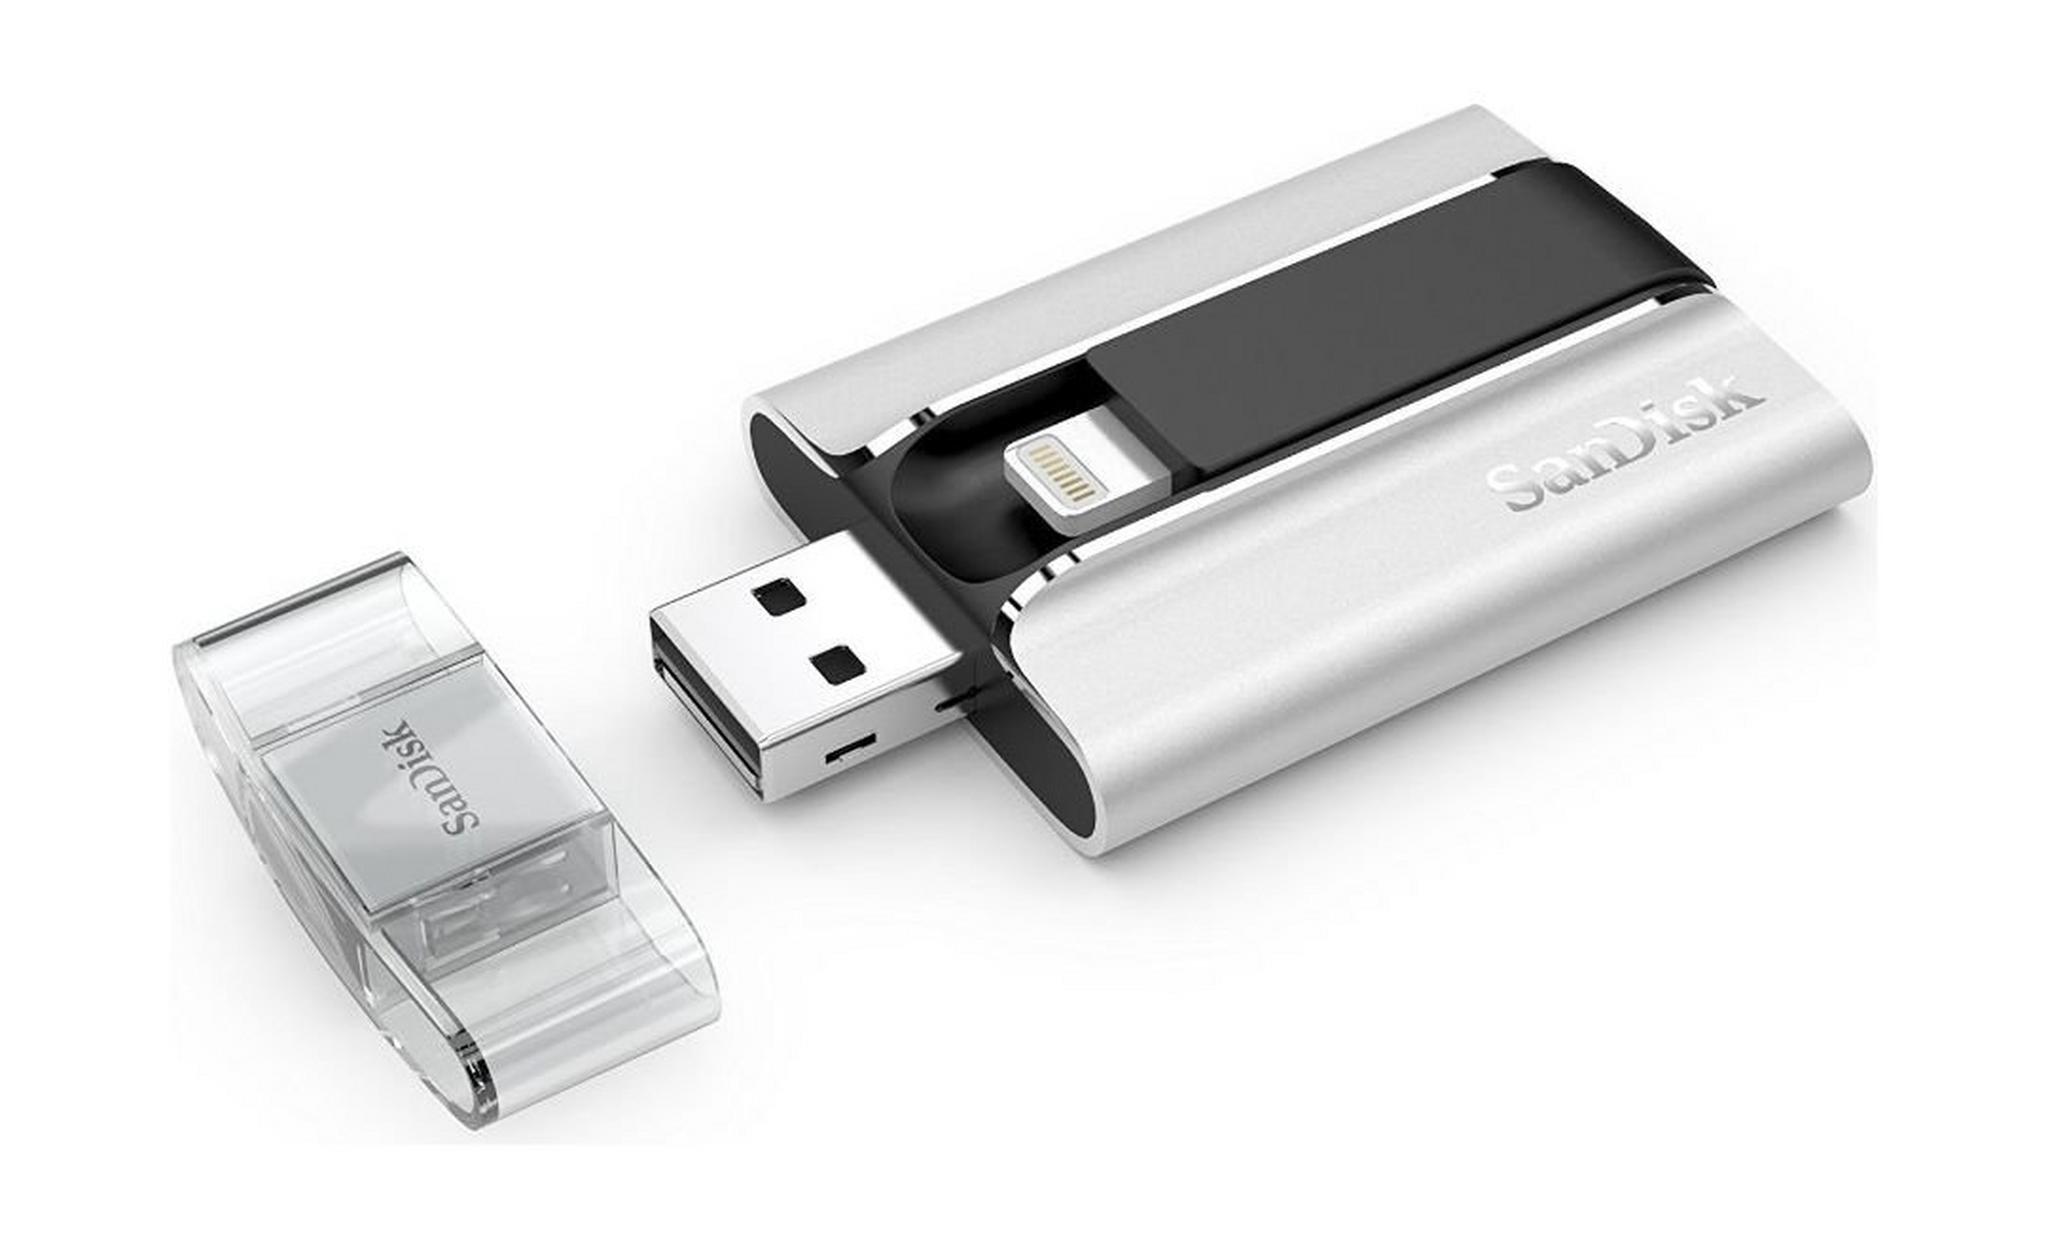 SanDisk SDIX-032G-G57 iXpand 32GB USB Flash Drive and Lightening Cable for iPhone, iPods and iPad